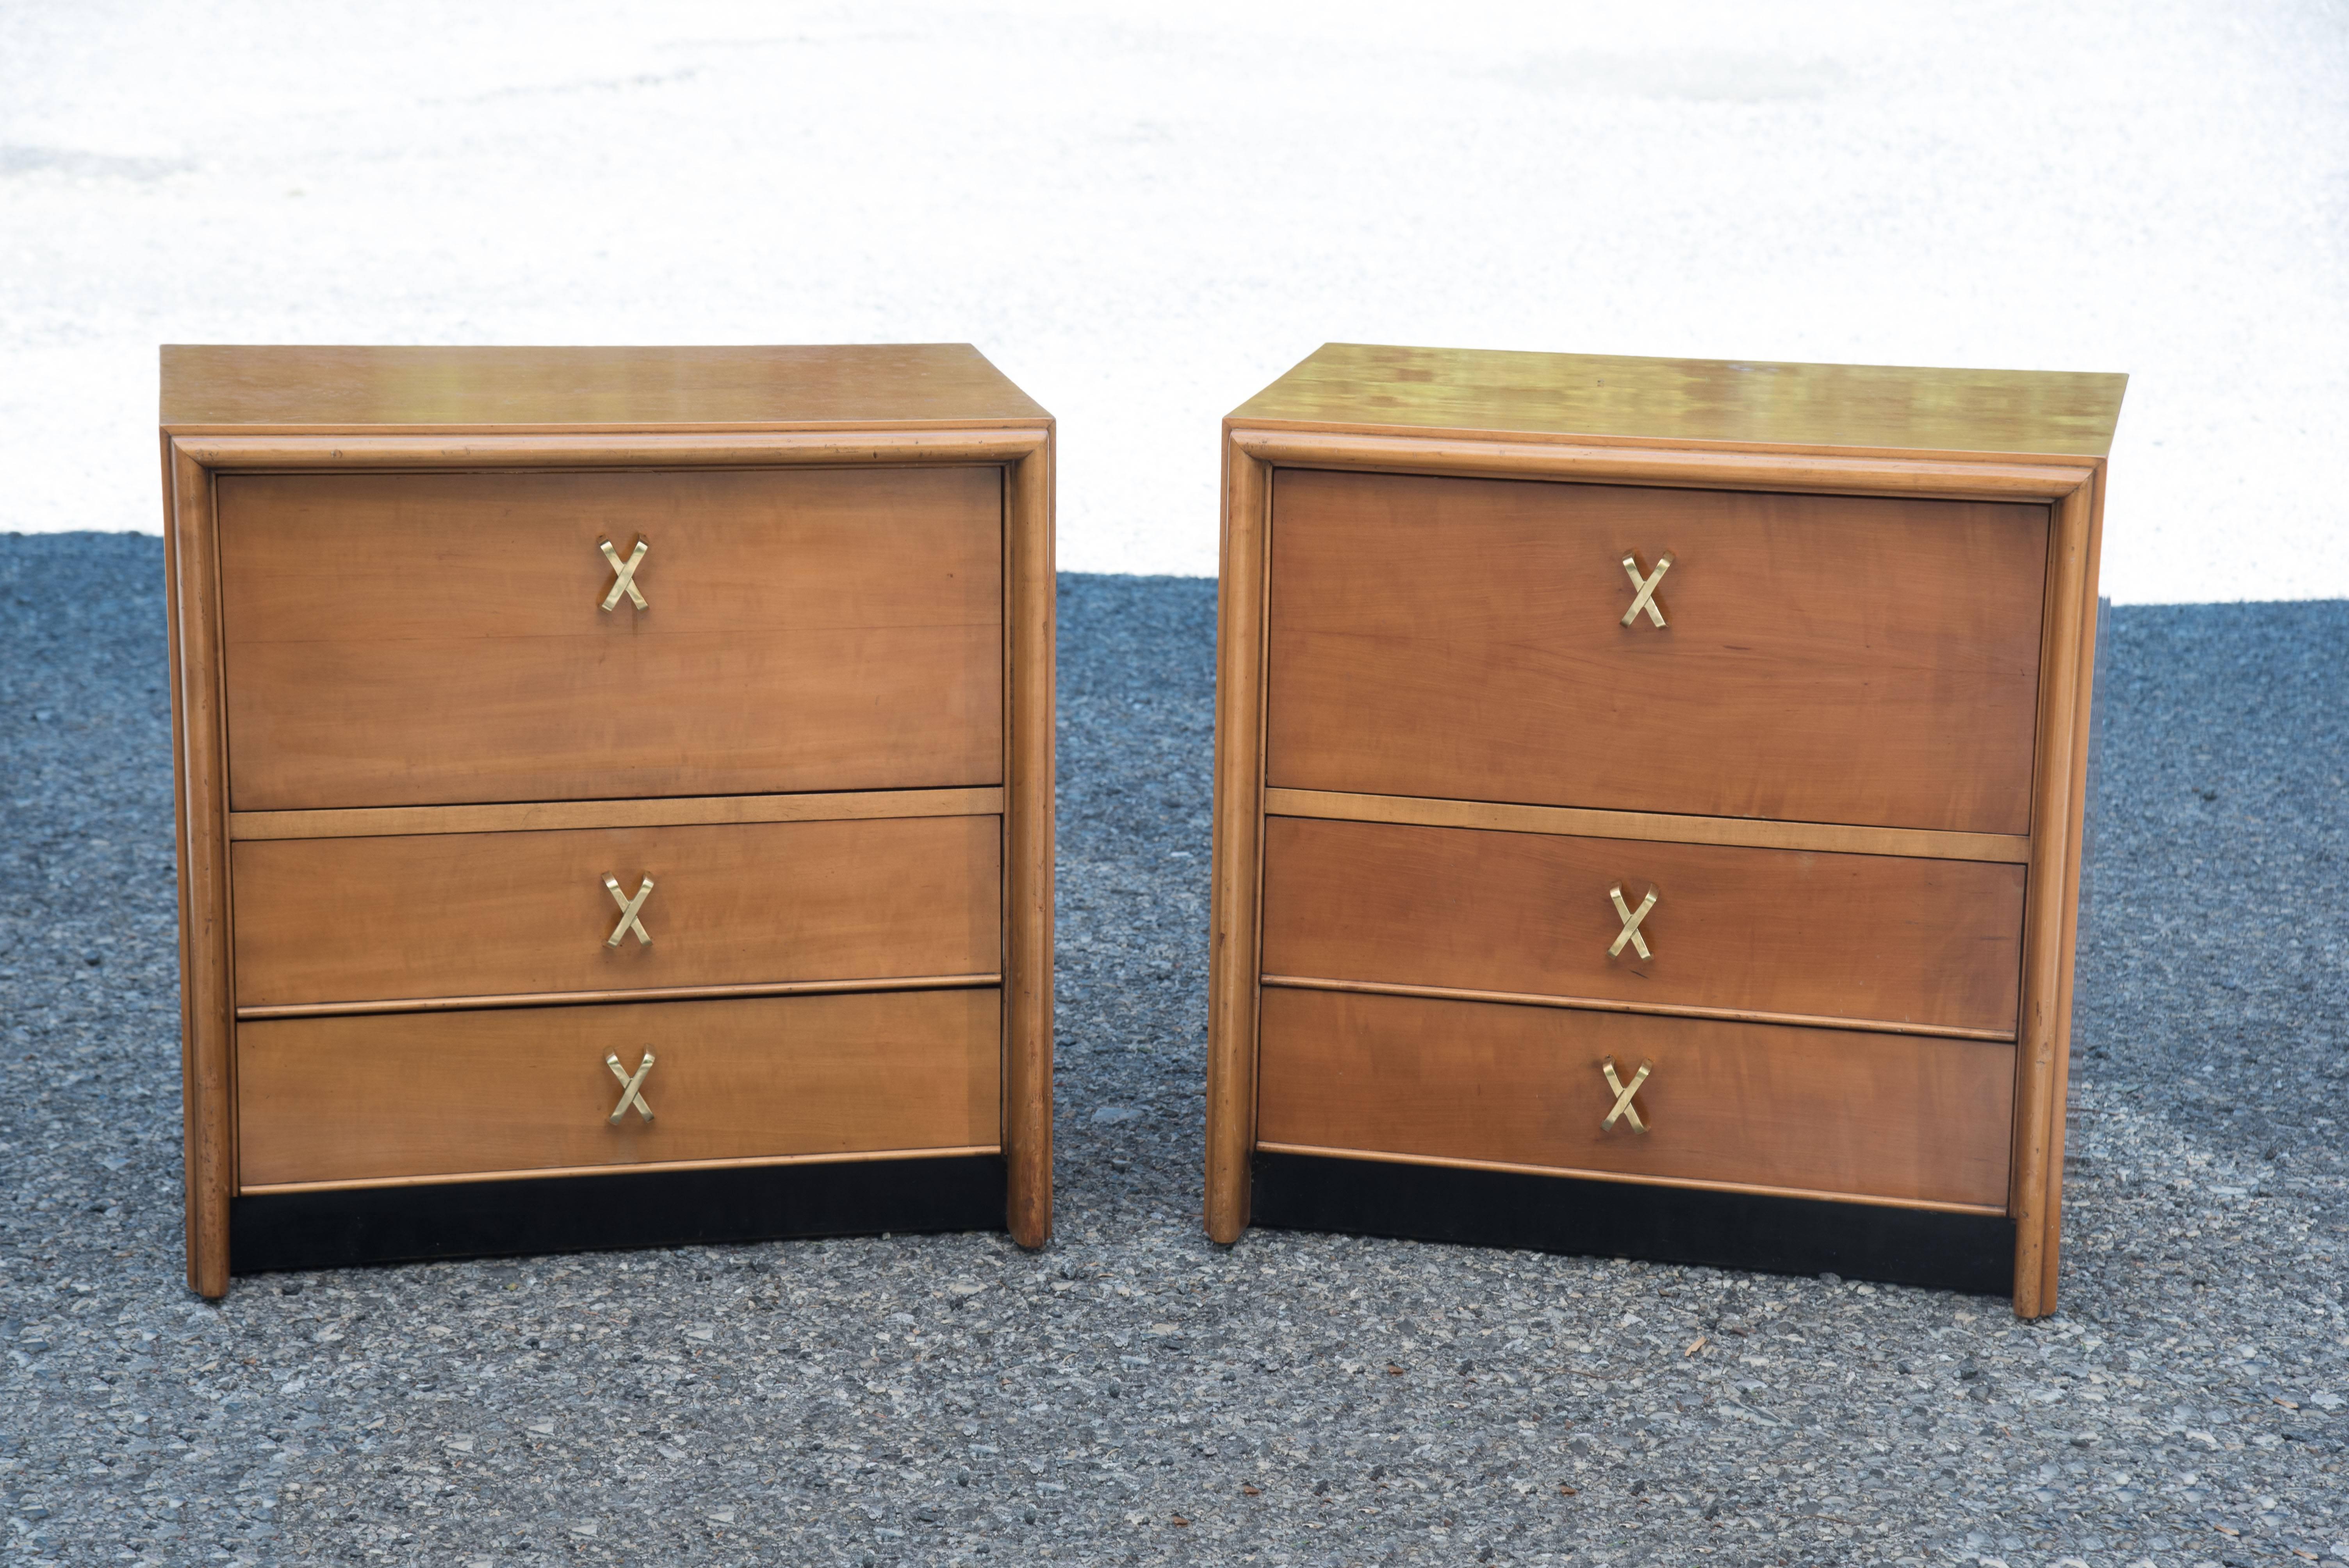 Two satin birch nightstands and a large chest of drawers by Paul Frankl for Johnson Furniture. They also have John Stuart labels.
Nightstand top drawer 9" H & 21.75" W.
Bottom drawer 5" H and 21.75".
Cool brass